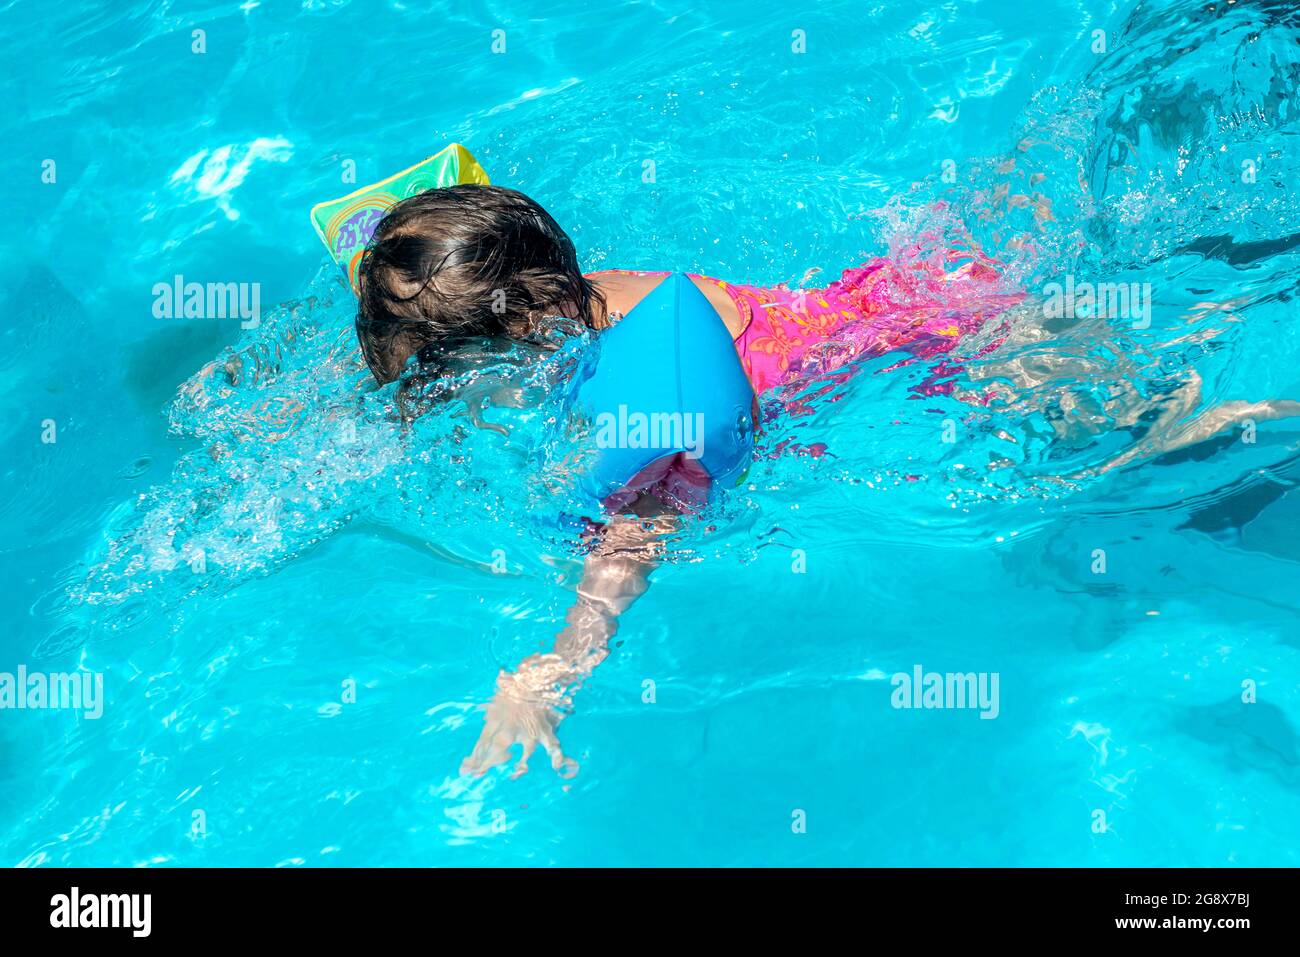 toddler alone diving in the swimming pool Stock Photo